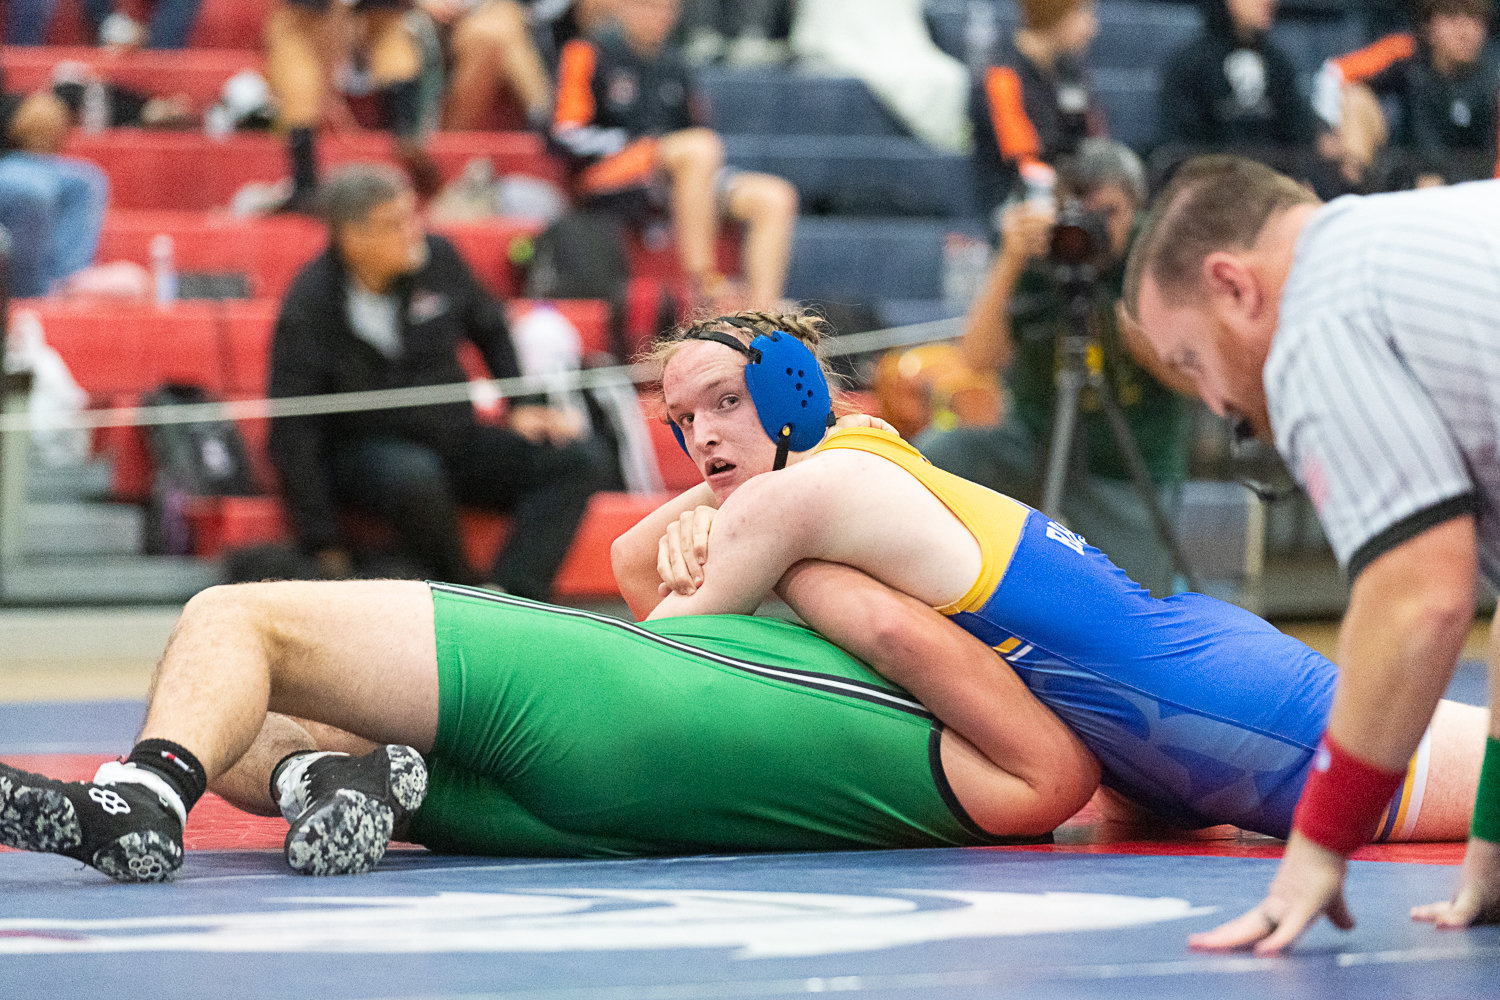 Rochester's Jack Dane pins Tumwater's Tristan Poulos in the third-place match of the 195-pound division at the 2A Evergreen Sub-Regional Tournament at Black Hills on Feb. 4.